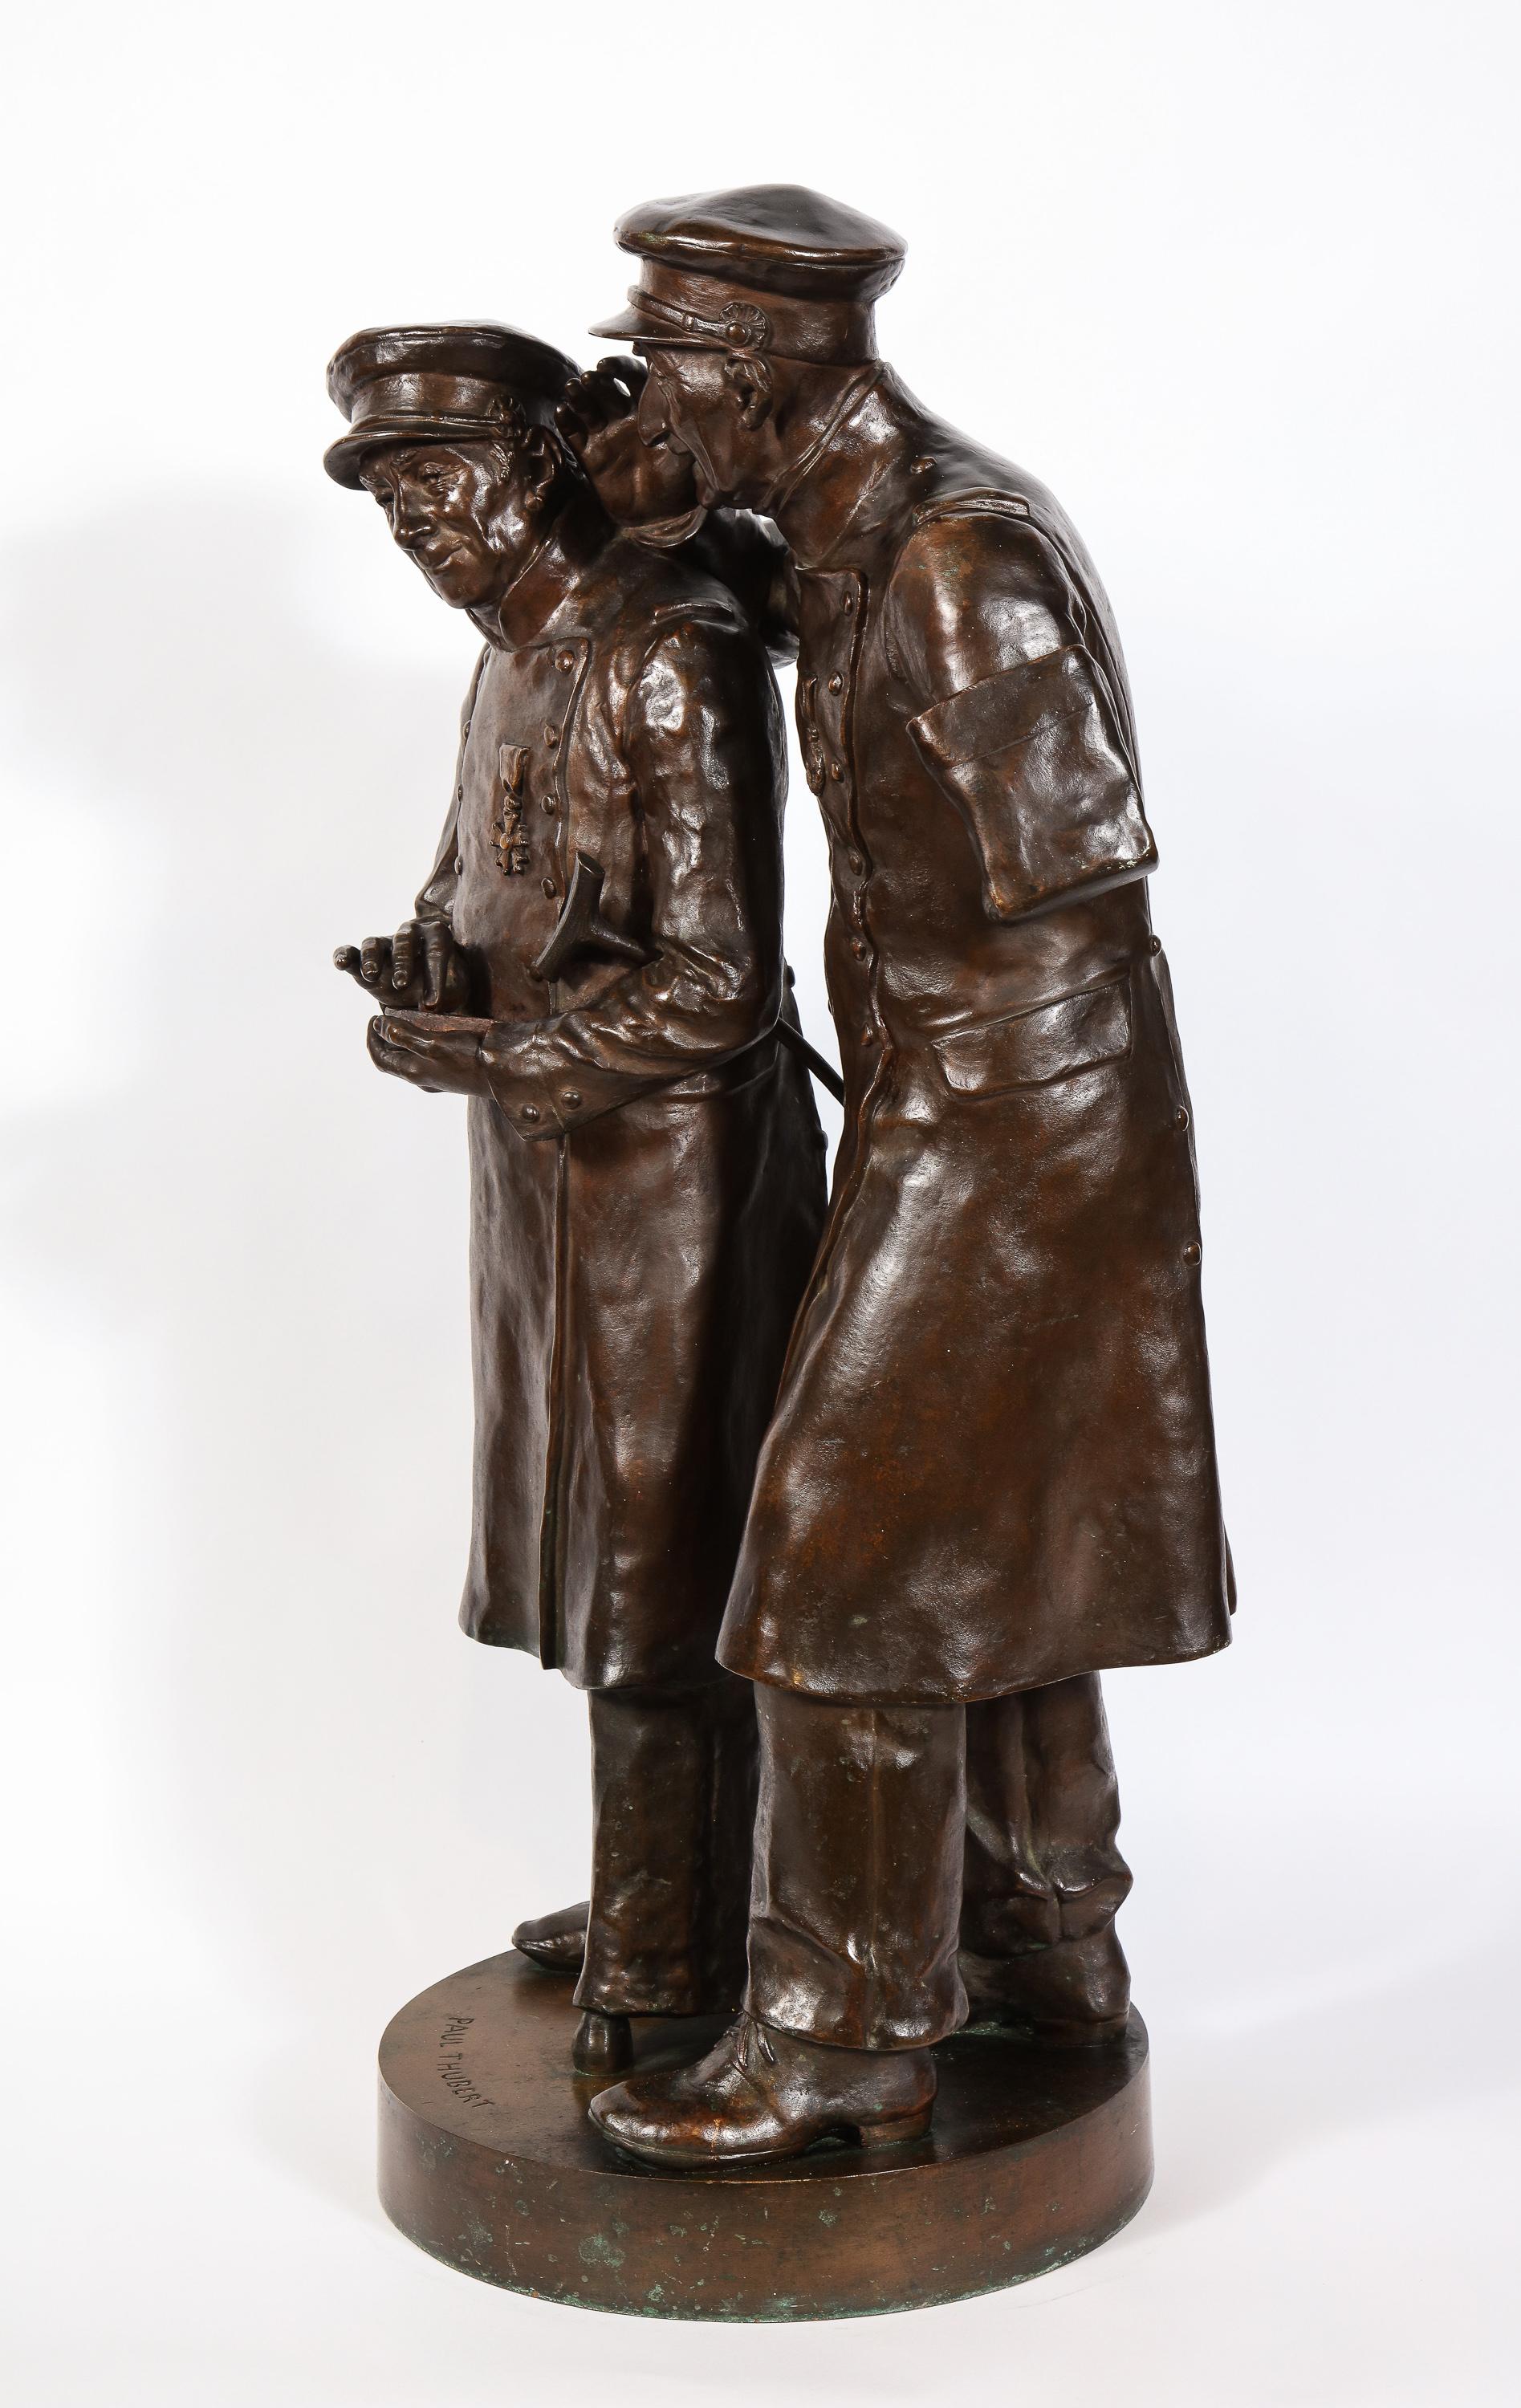 British Colonial Paul Thubert 'English, 19th Century' a Large Bronze Sculpture of War Veterans For Sale